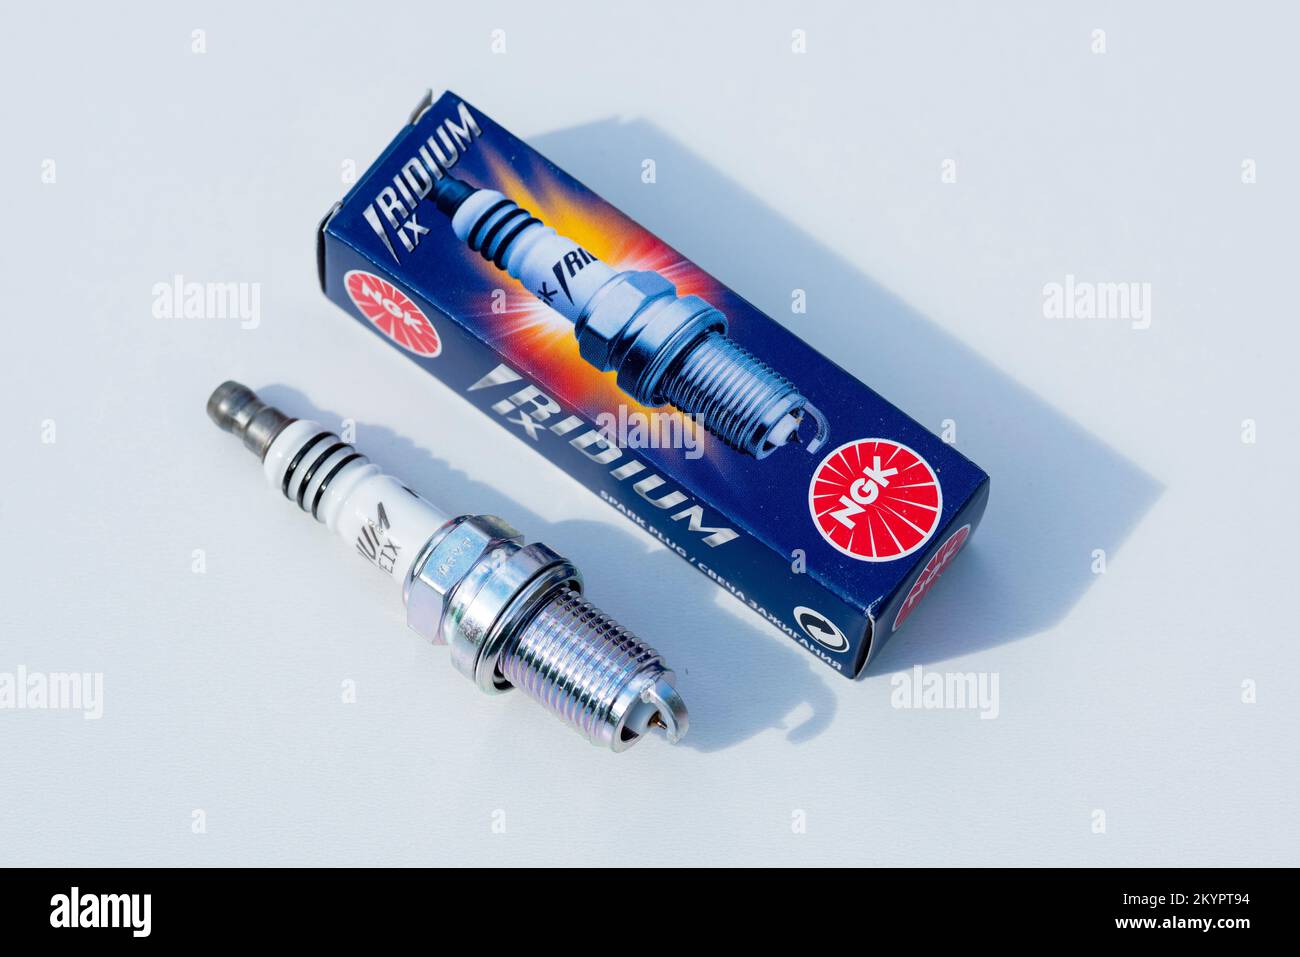 A new single spark plug for a petrol combustion engine Stock Photo